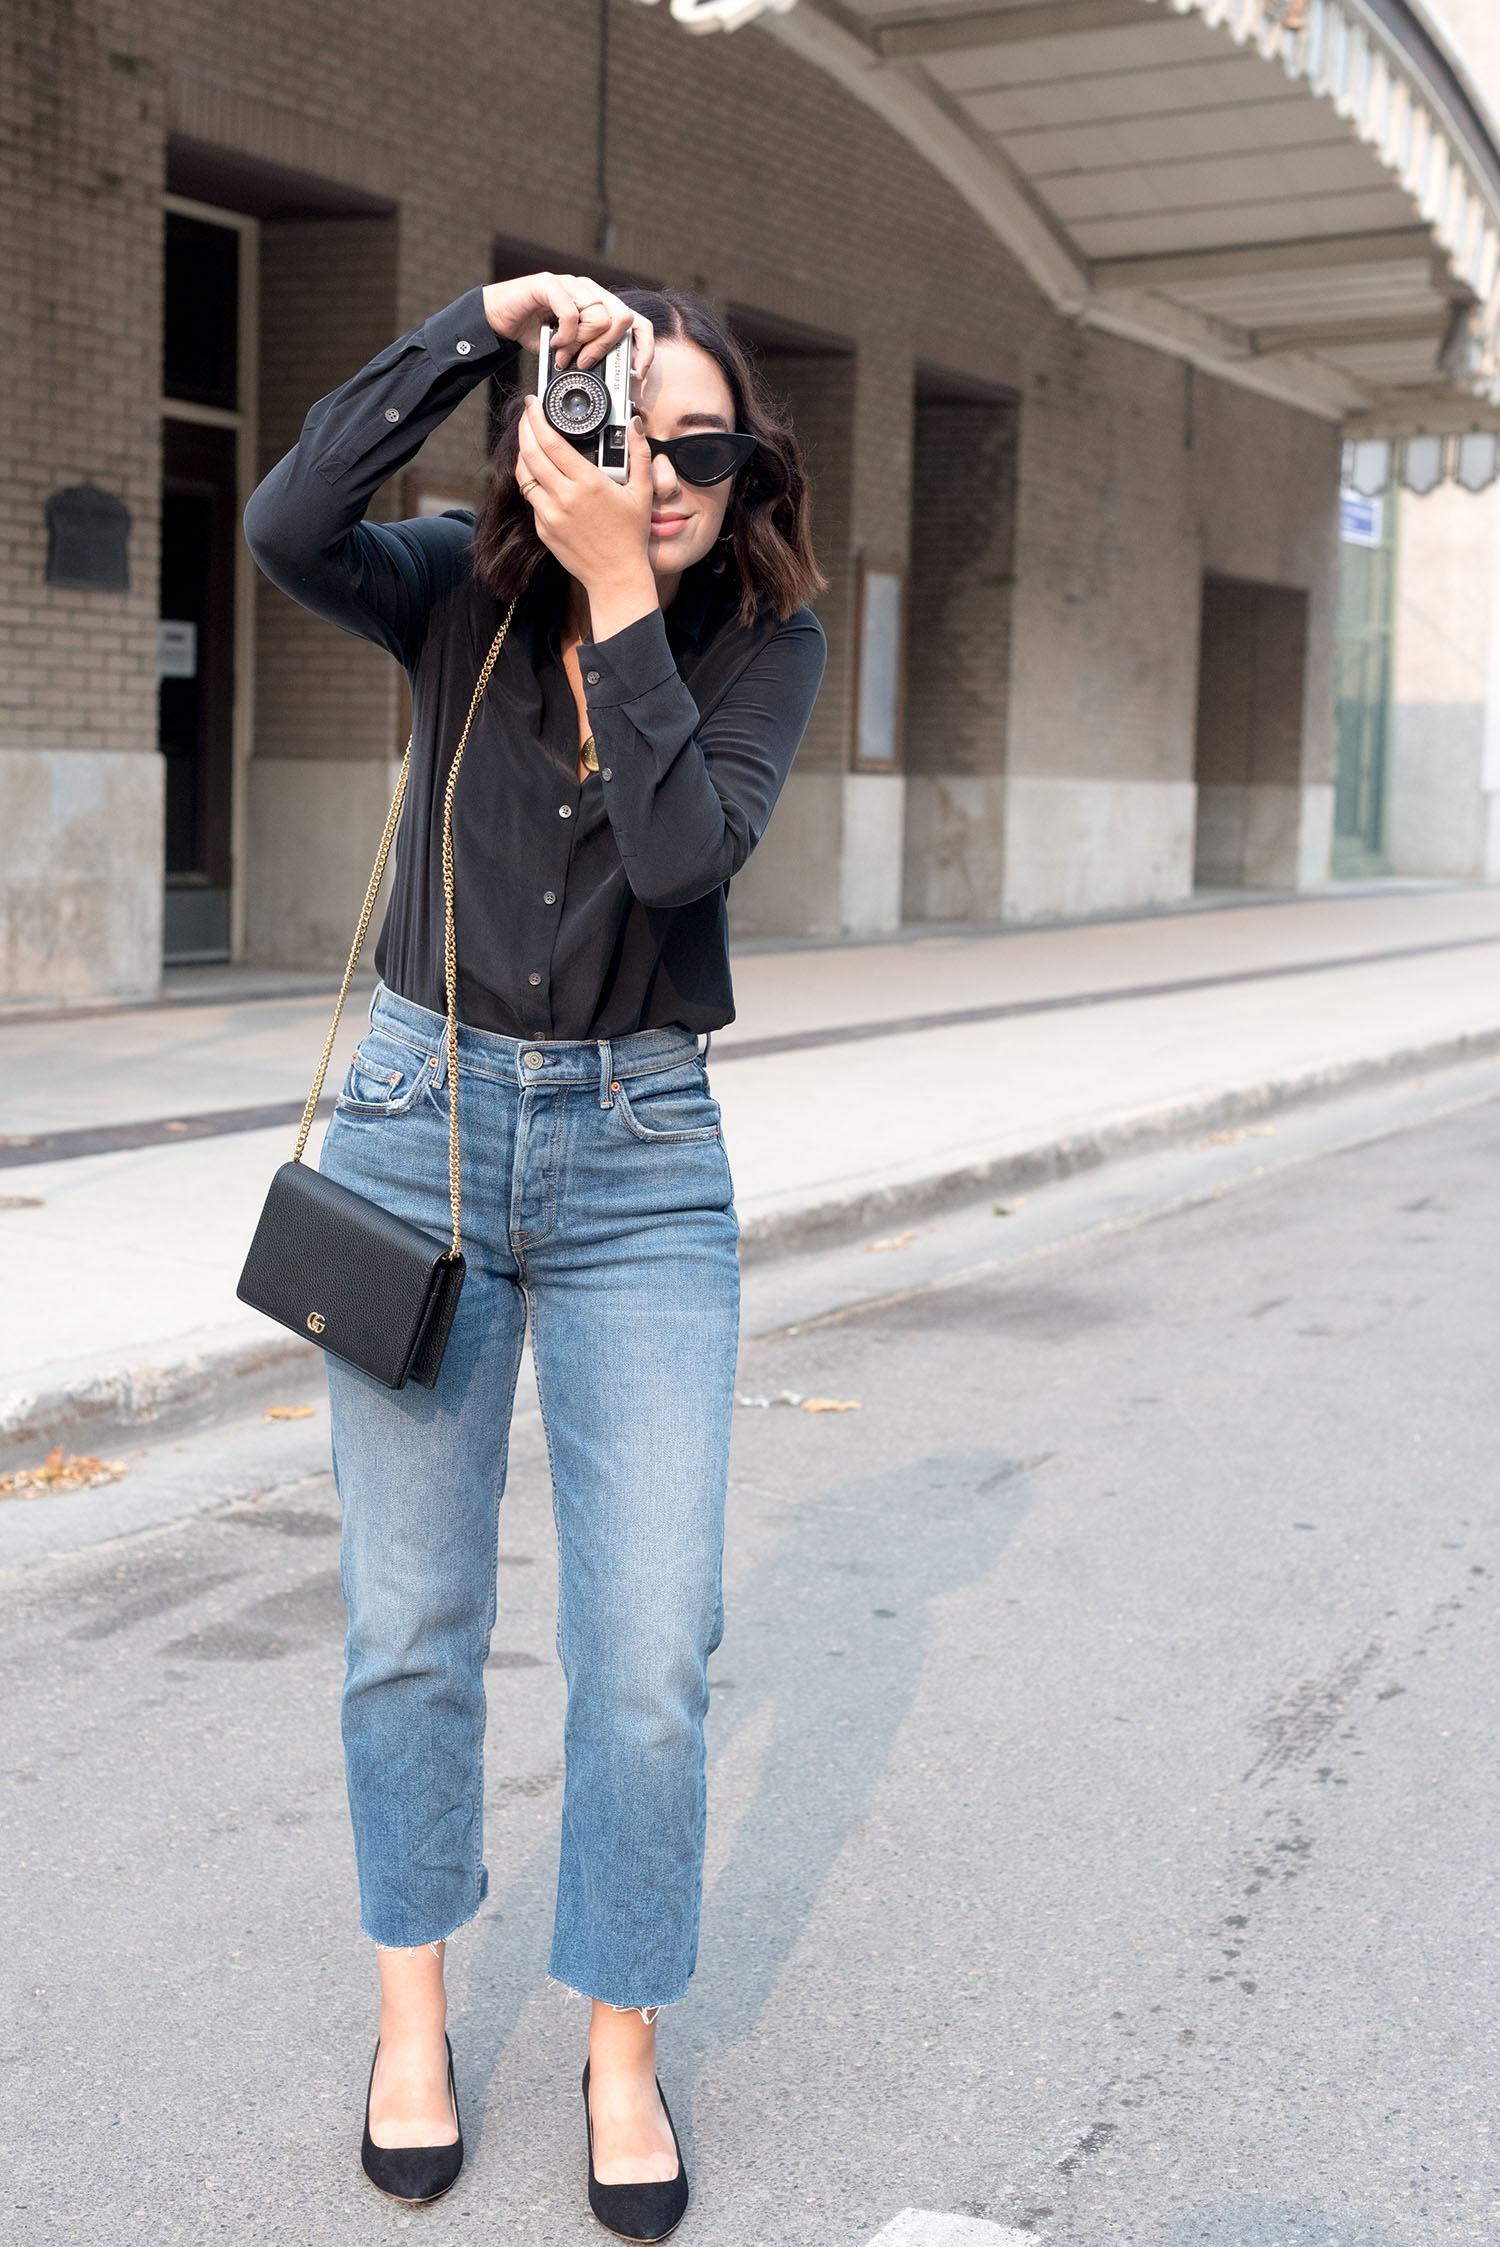 Top Winnipeg fashion blogger Cee Fardoe of Coco & Vera talks a photo with an Olympus Trip camera while wearing Grlfrnd Helena jeans and carrying a Gucci Marmont handbag